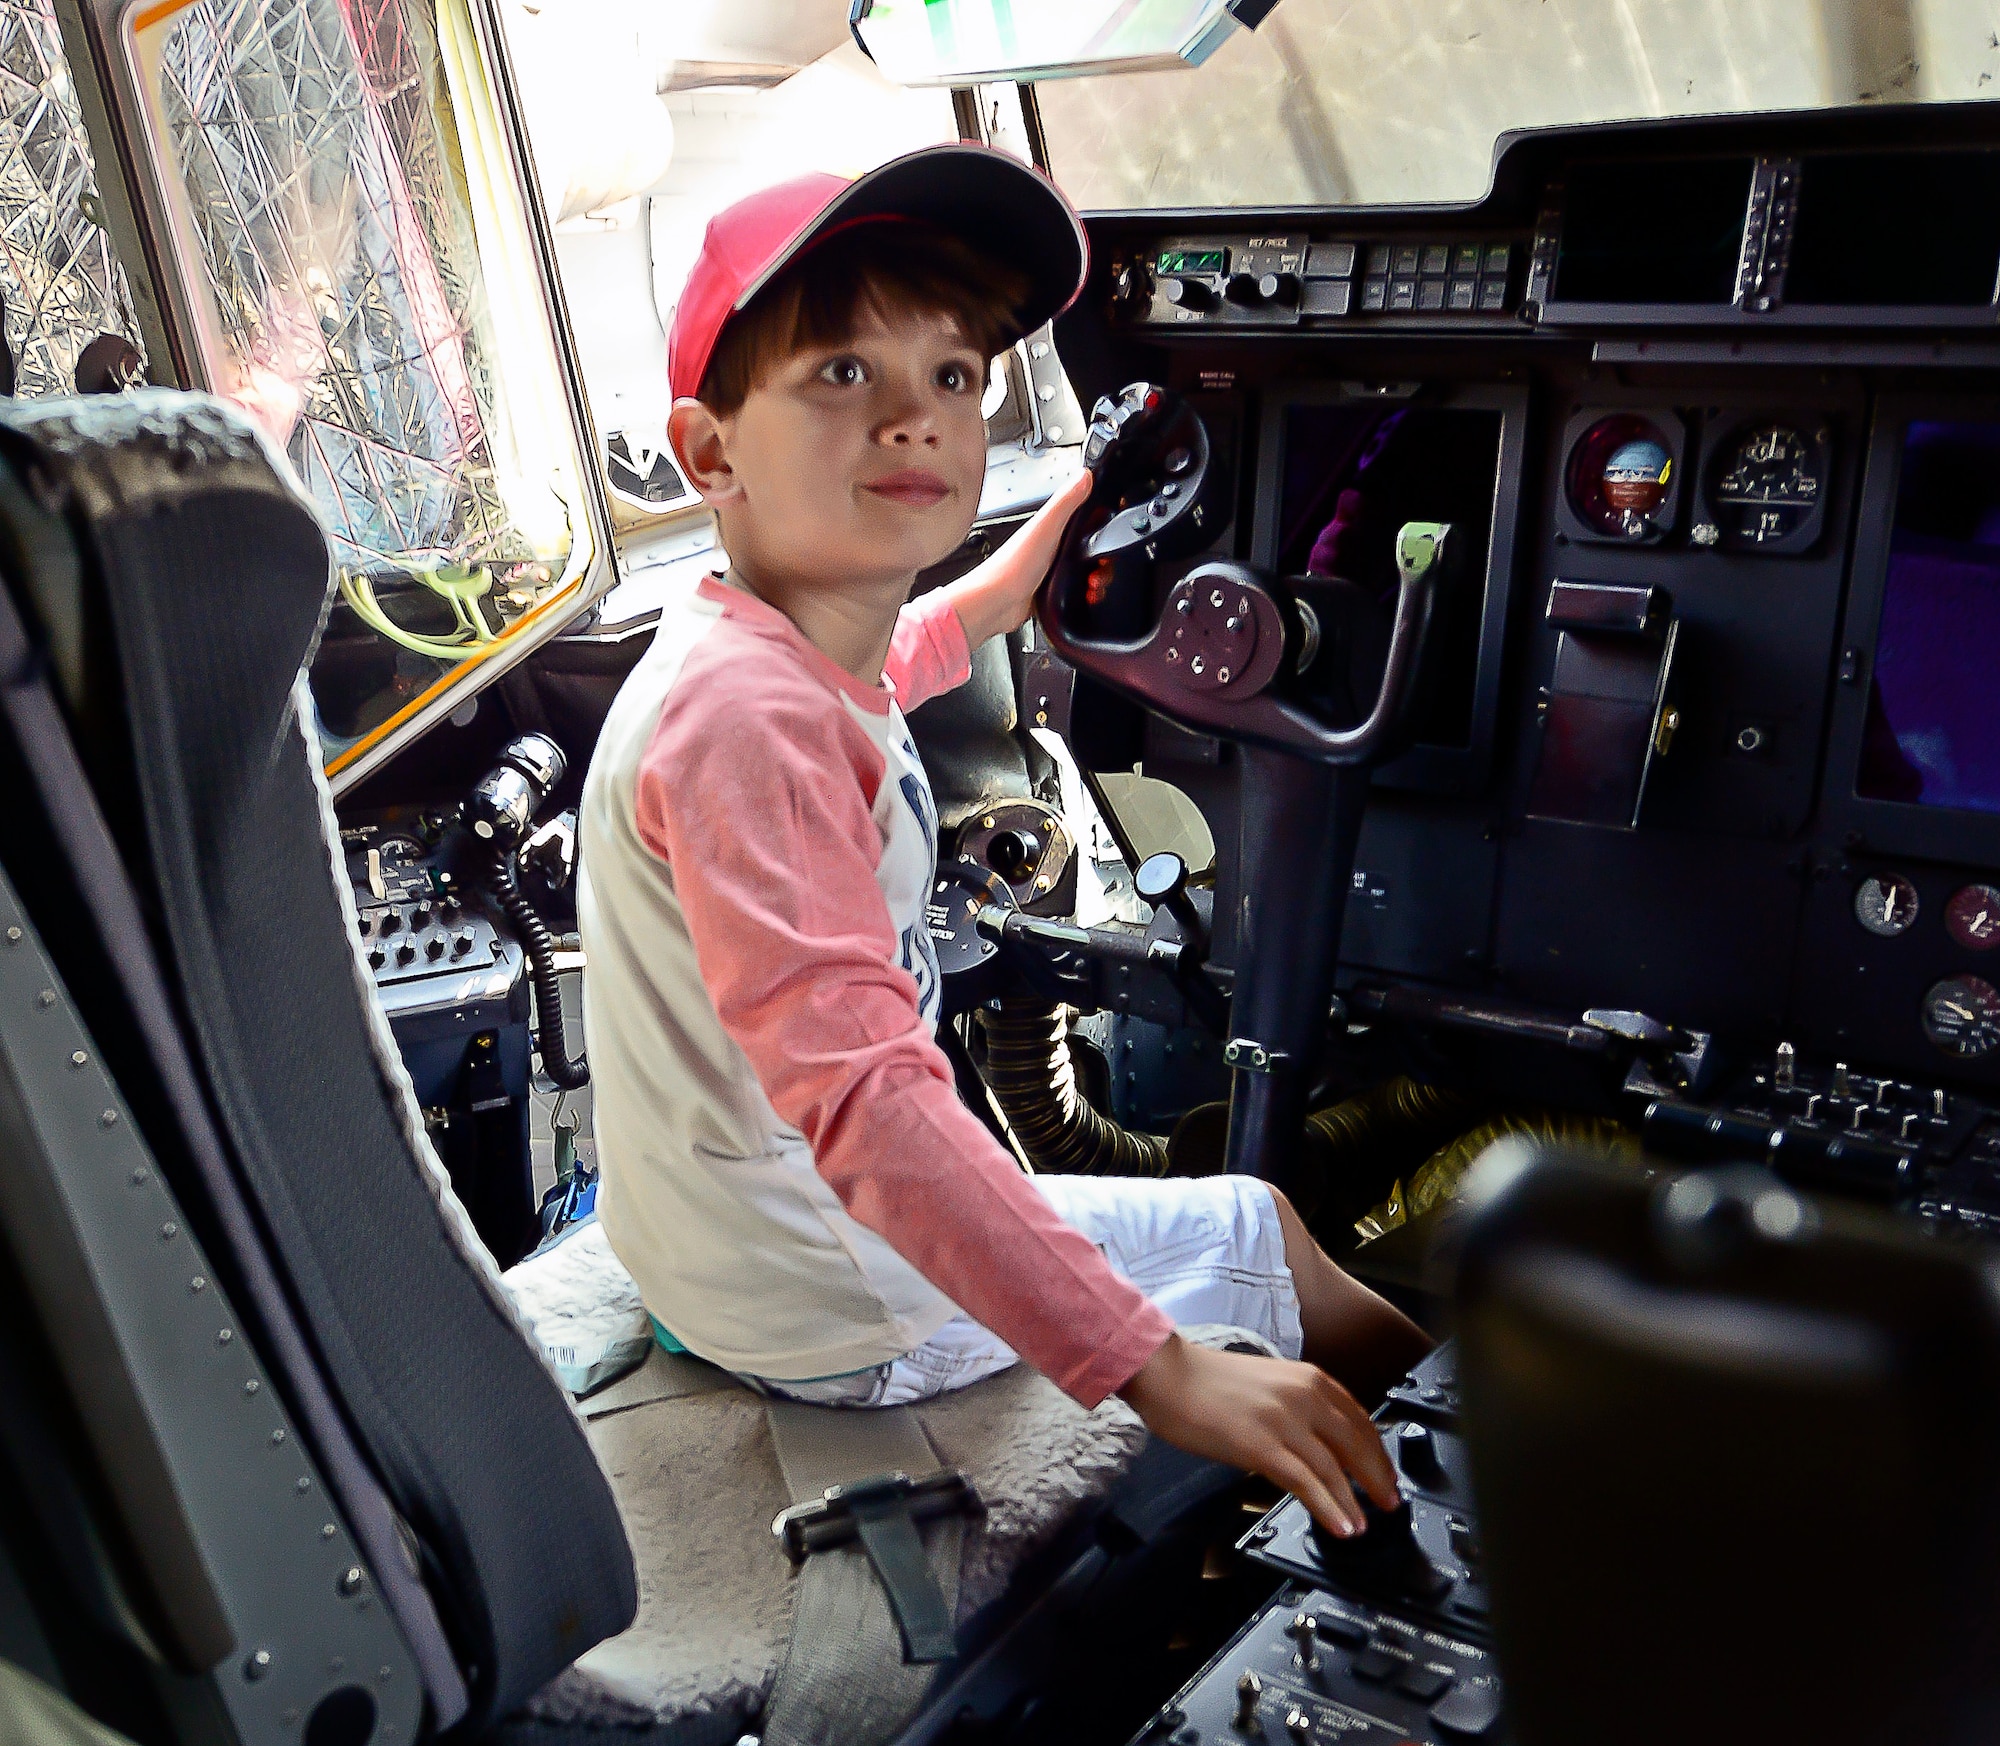 A child sits in the pilot’s chair of a C-130J Super Hercules during his tour of the aircraft at the Africa Aerospace & Defence Expo at Waterkloof Air Force Base, South Africa, Sept. 20, 2014.  The C-130 was part of a total-force team of Guard, Reserve and active-duty Soldiers and Airmen at the expo. (U.S. Air Force photo/Staff Sgt. Travis Edwards) Released